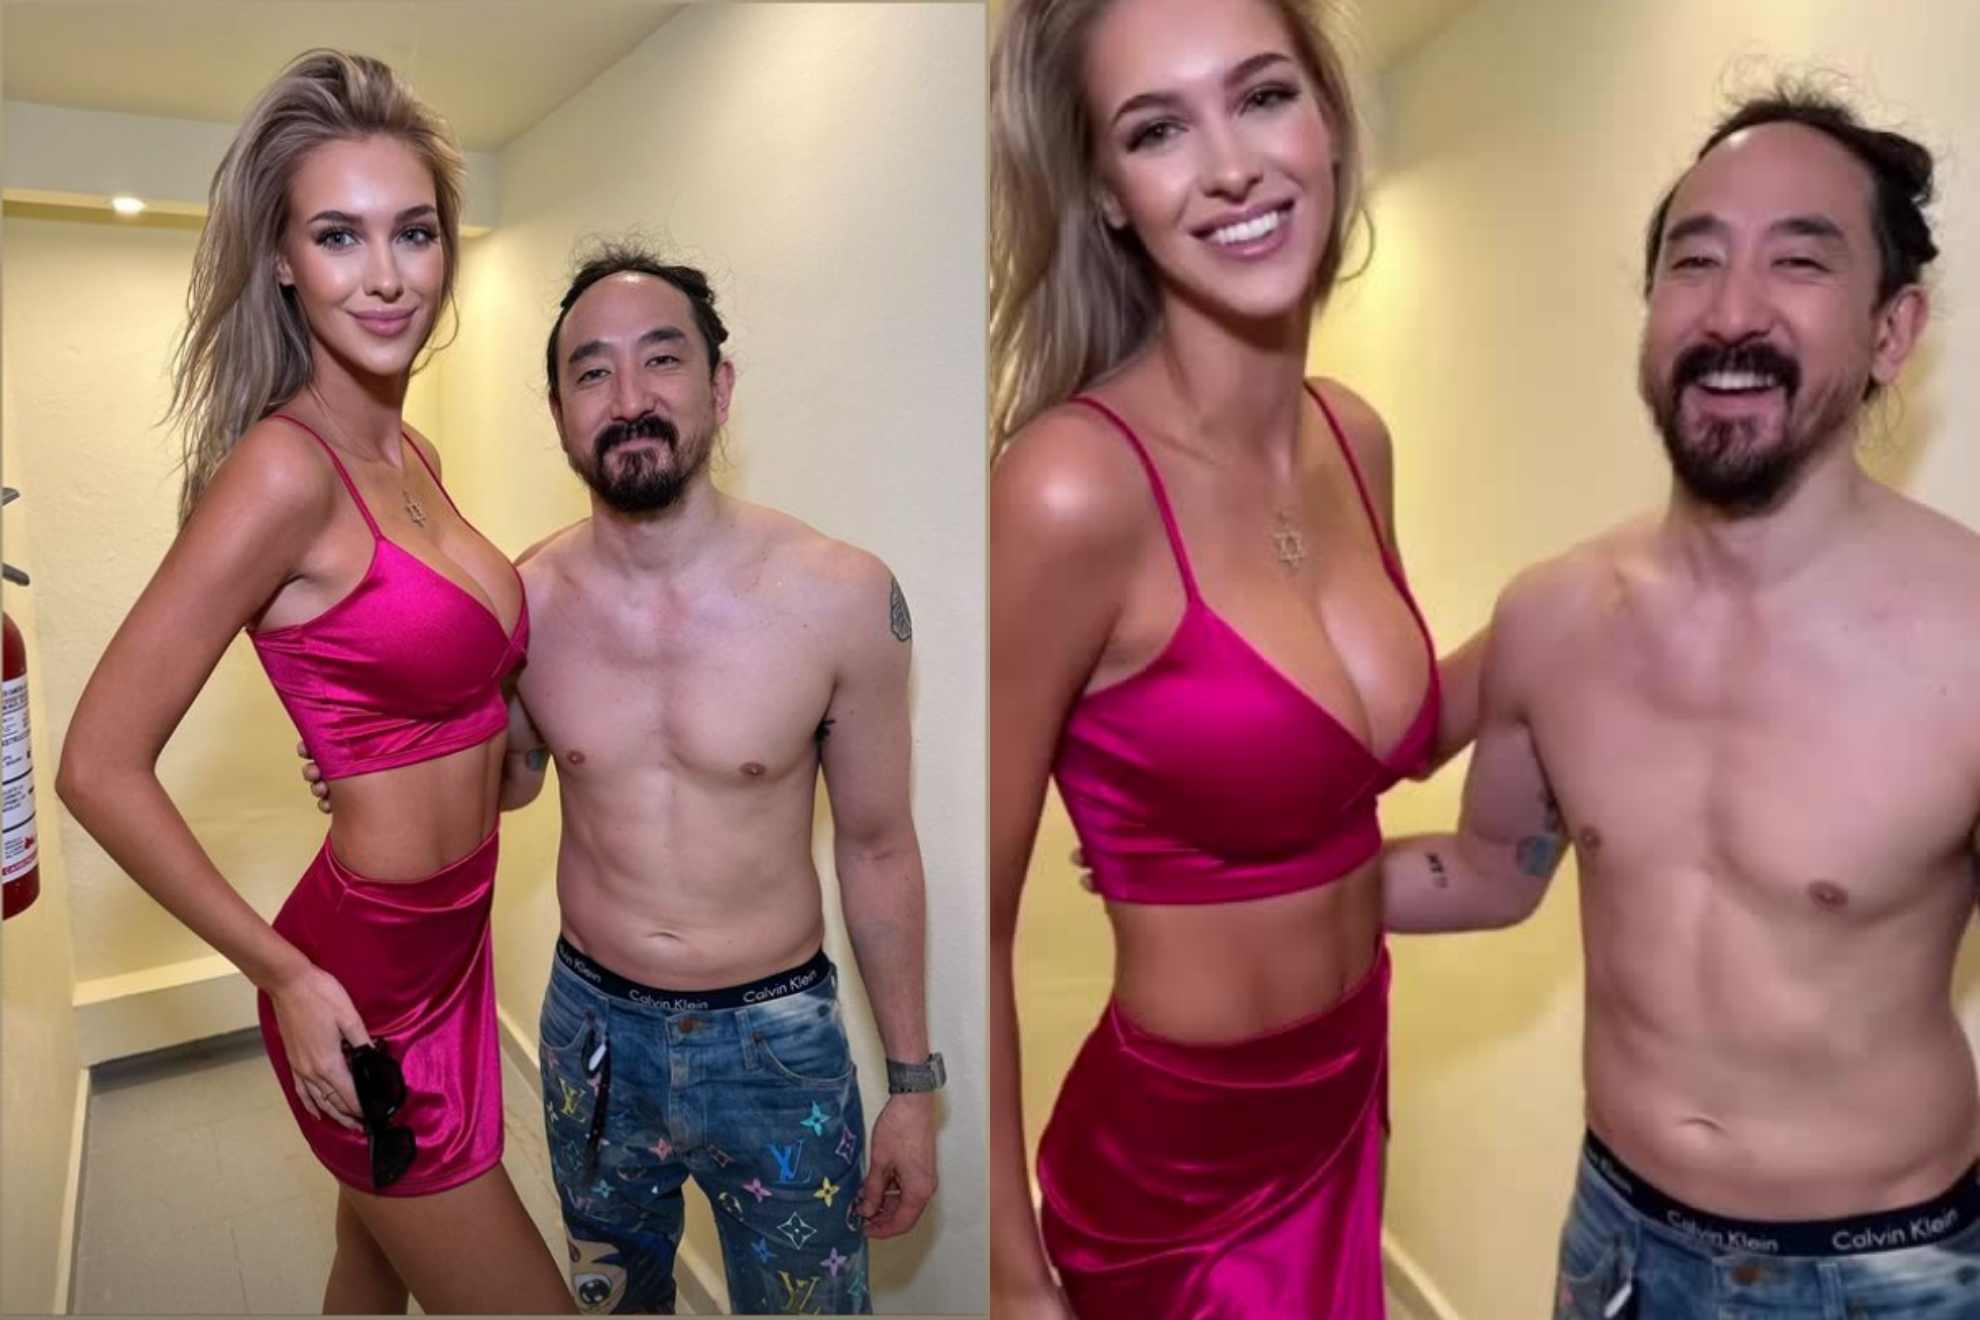 Veronika Rajek, left, and Steve Aoki pose together after the EDM star's concert in Cancun, Mexico.